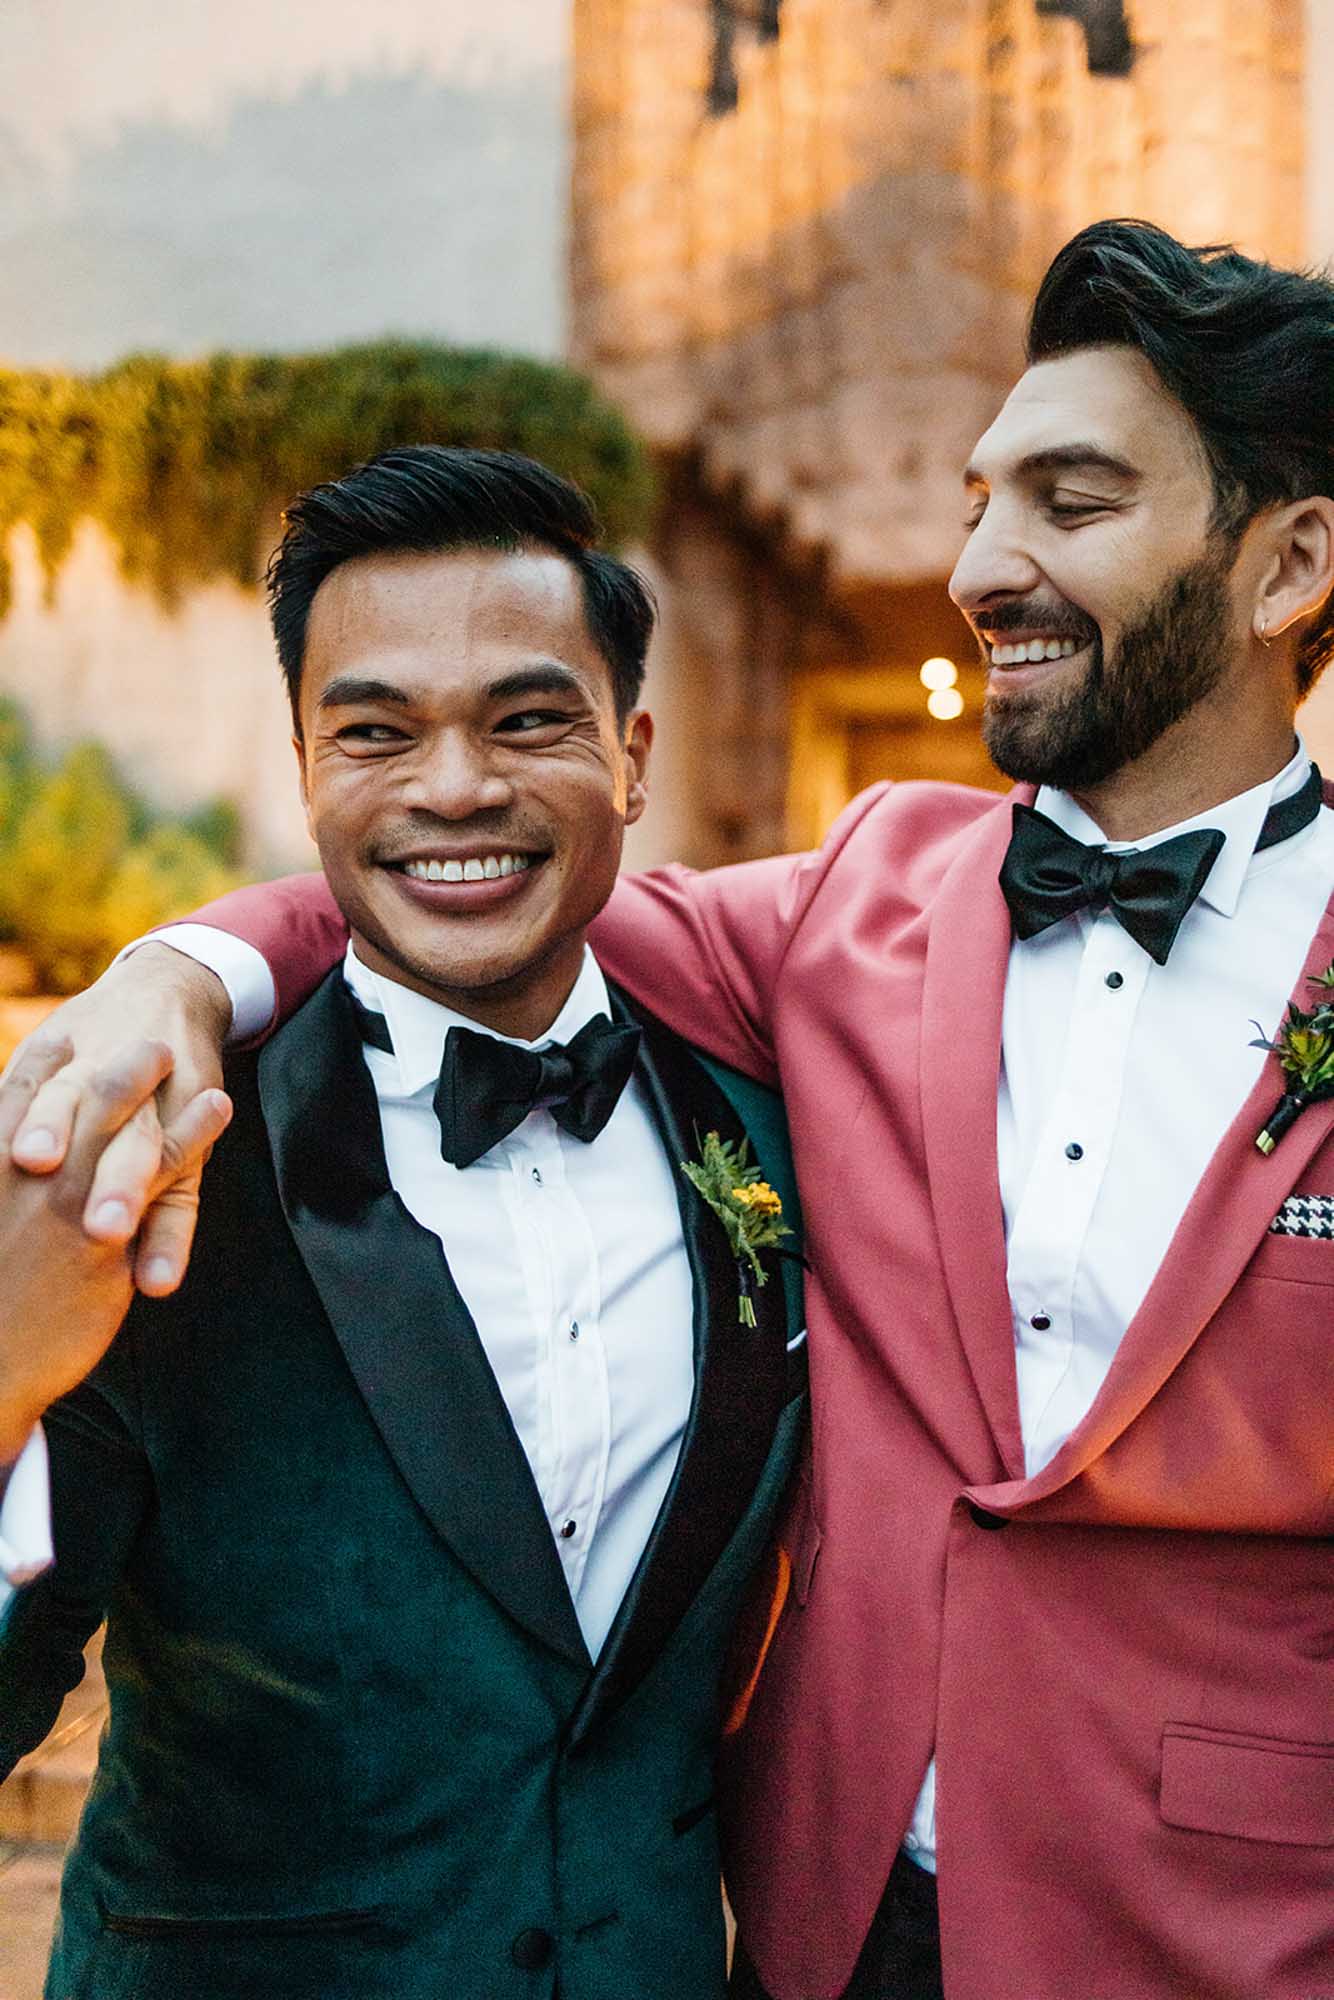 Colorful and glamorous wedding at historic Hollywood house | Erin Marton Photography | Featured on Equally Wed, the leading LGBTQ+ wedding magazine